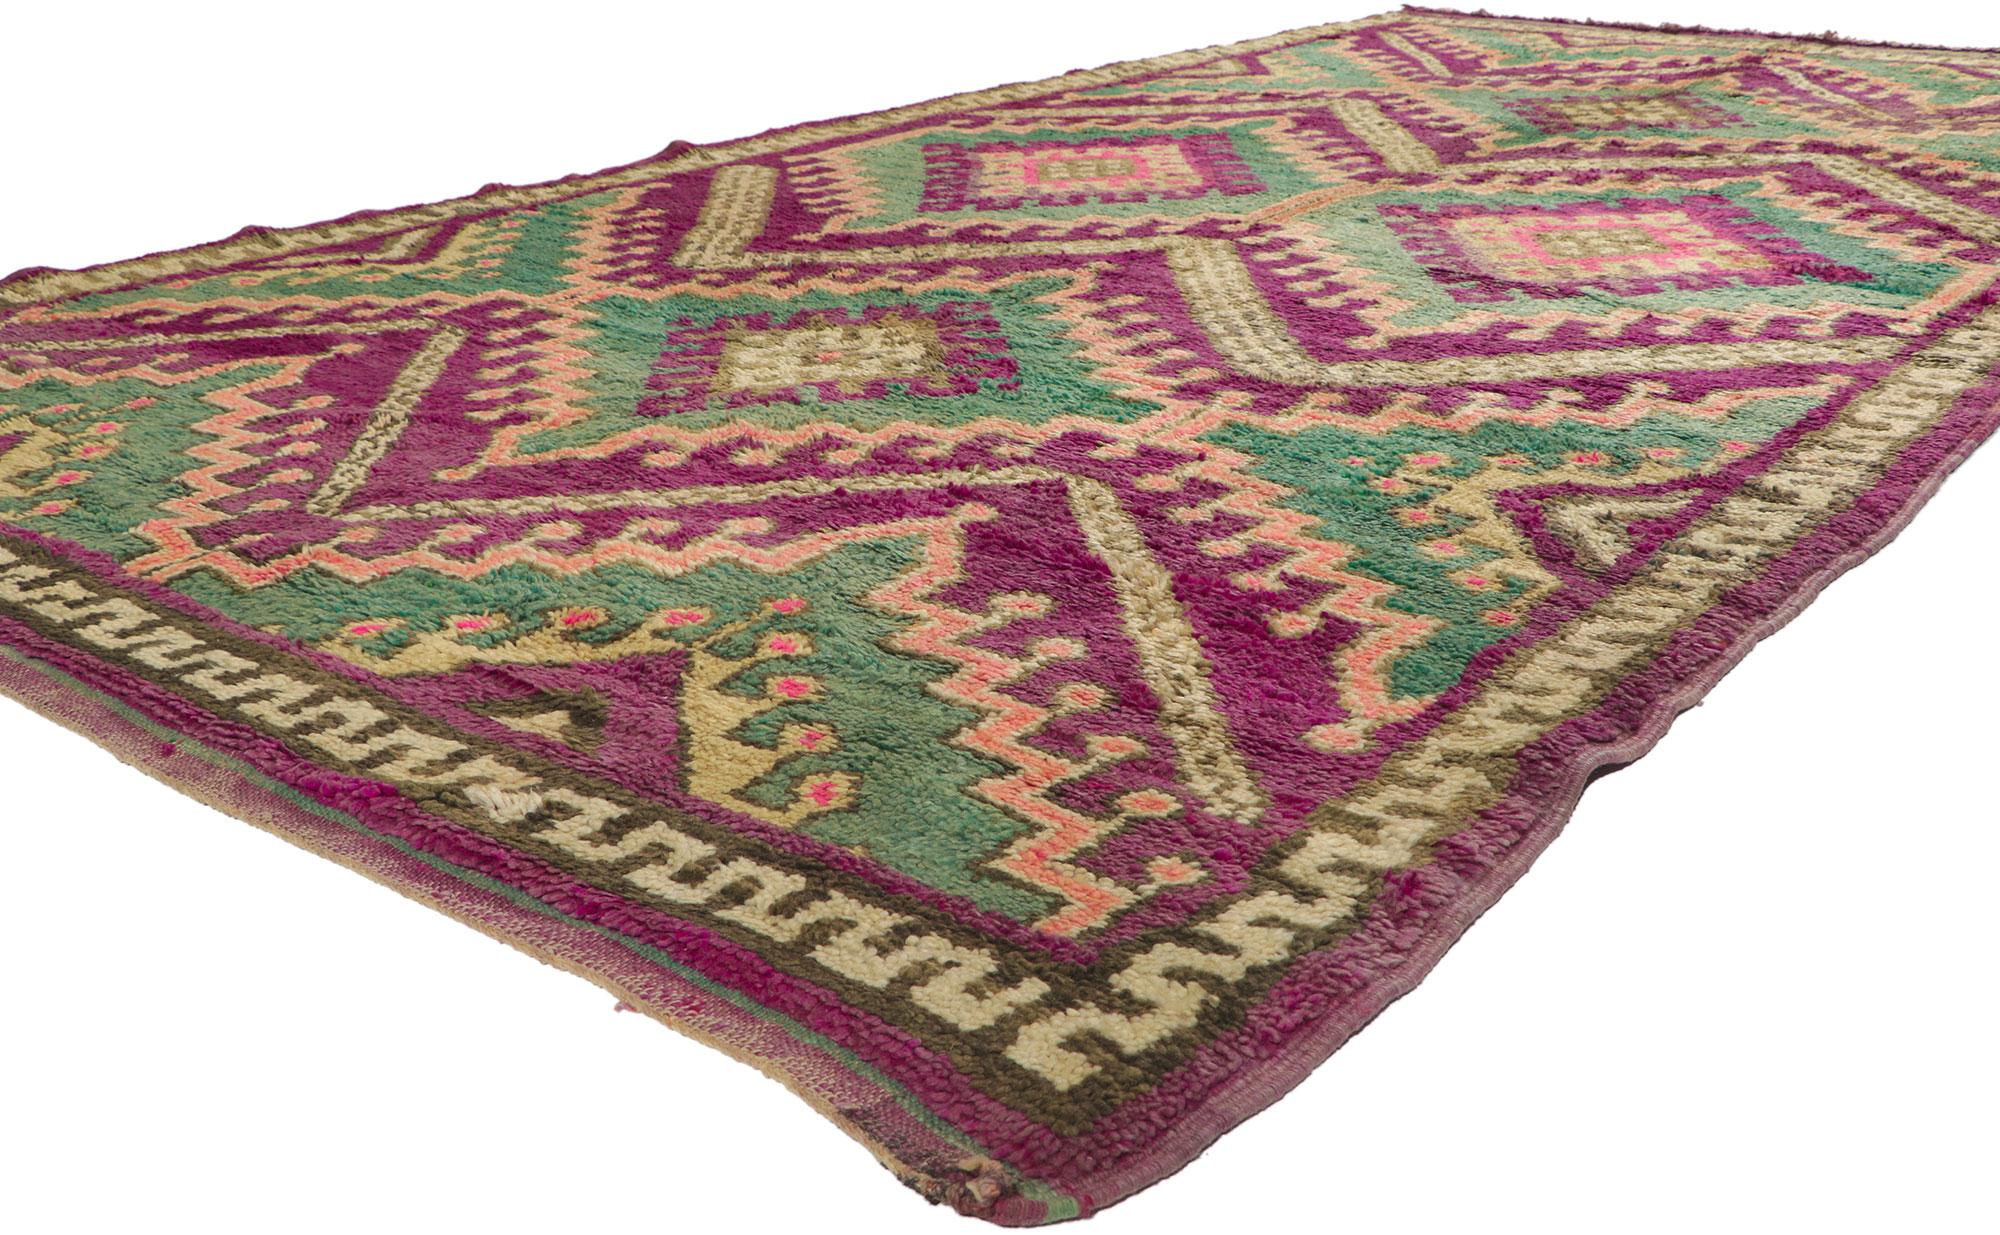 21662 vintage Berber Moroccan rug with Bohemian style 06'04 x 11'08. Showcasing a bold expressive design, incredible detail and texture, this hand knotted wool vintage Berber Moroccan rug is a captivating vision of woven beauty. The eye-catching